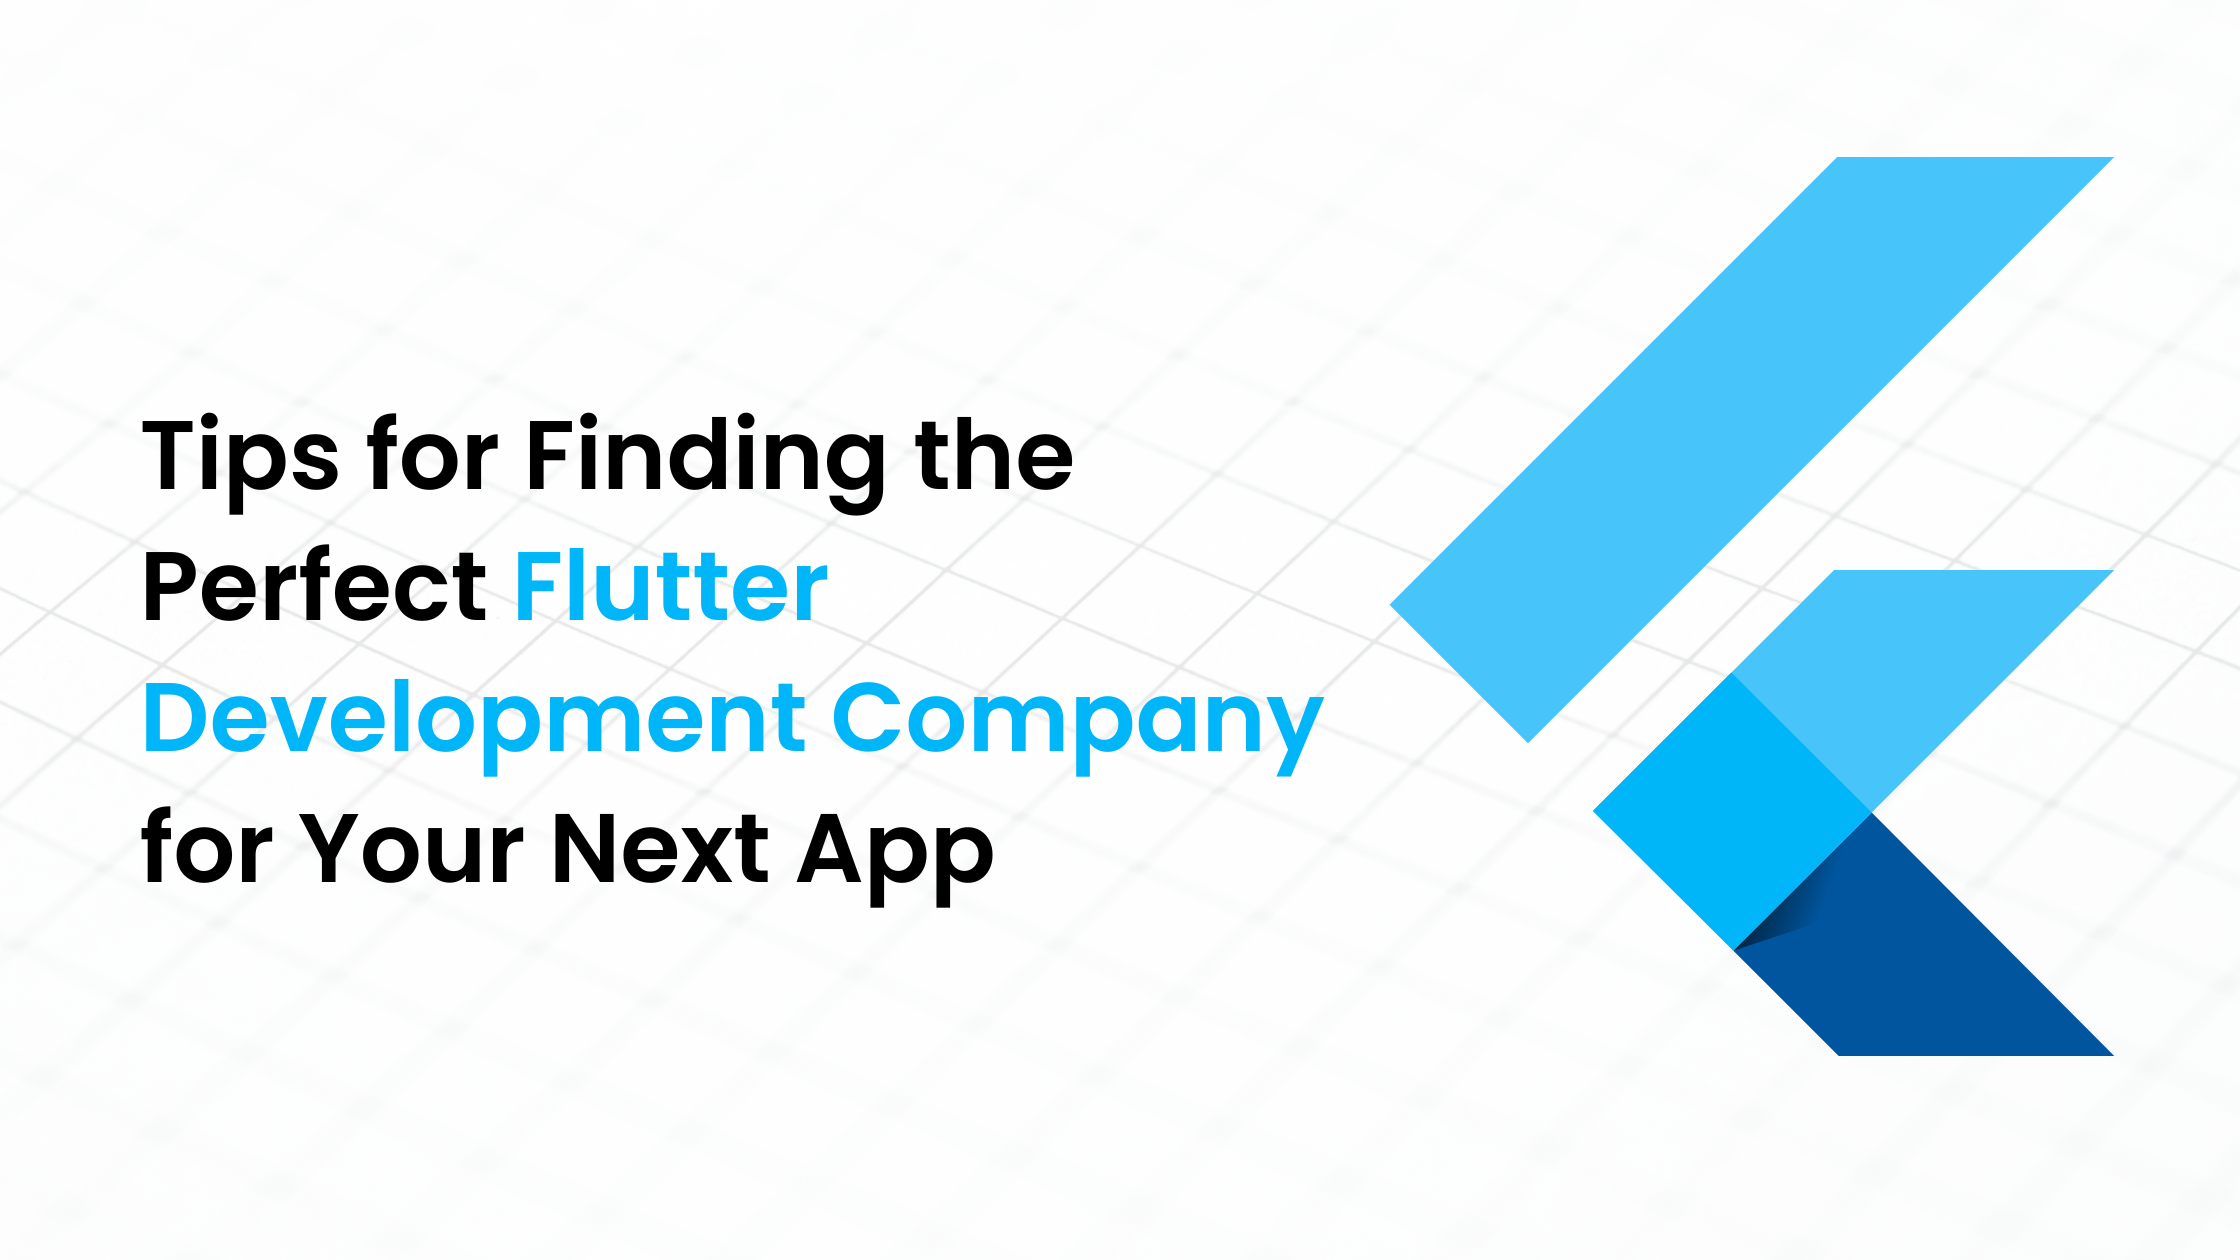 Tips for Finding the Perfect Flutter Development Company for Your Next App